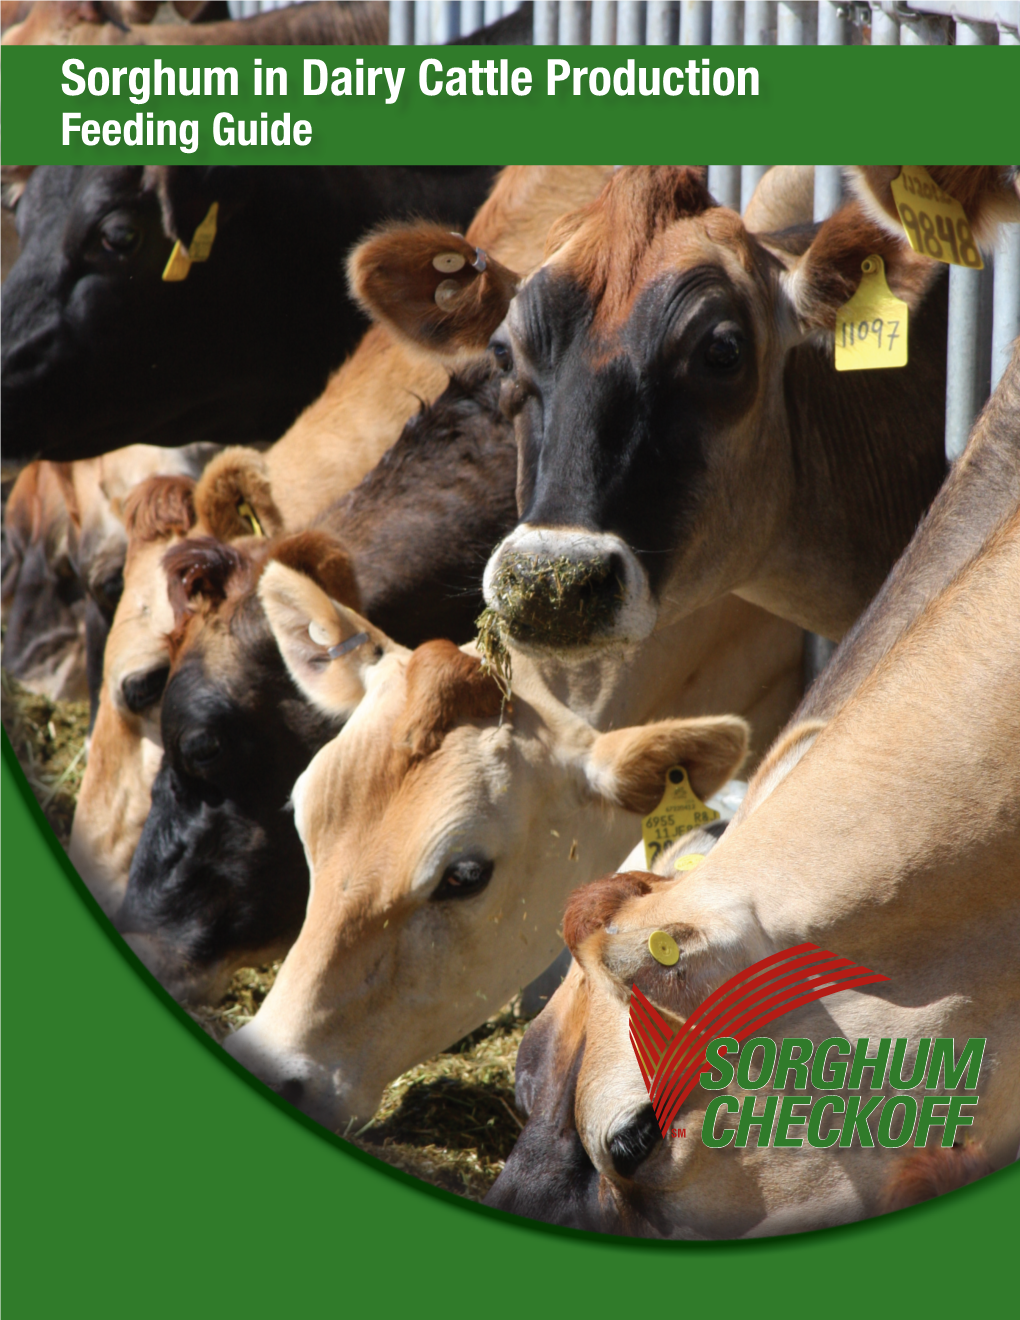 Sorghum in Dairy Cattle Production Feeding Guide